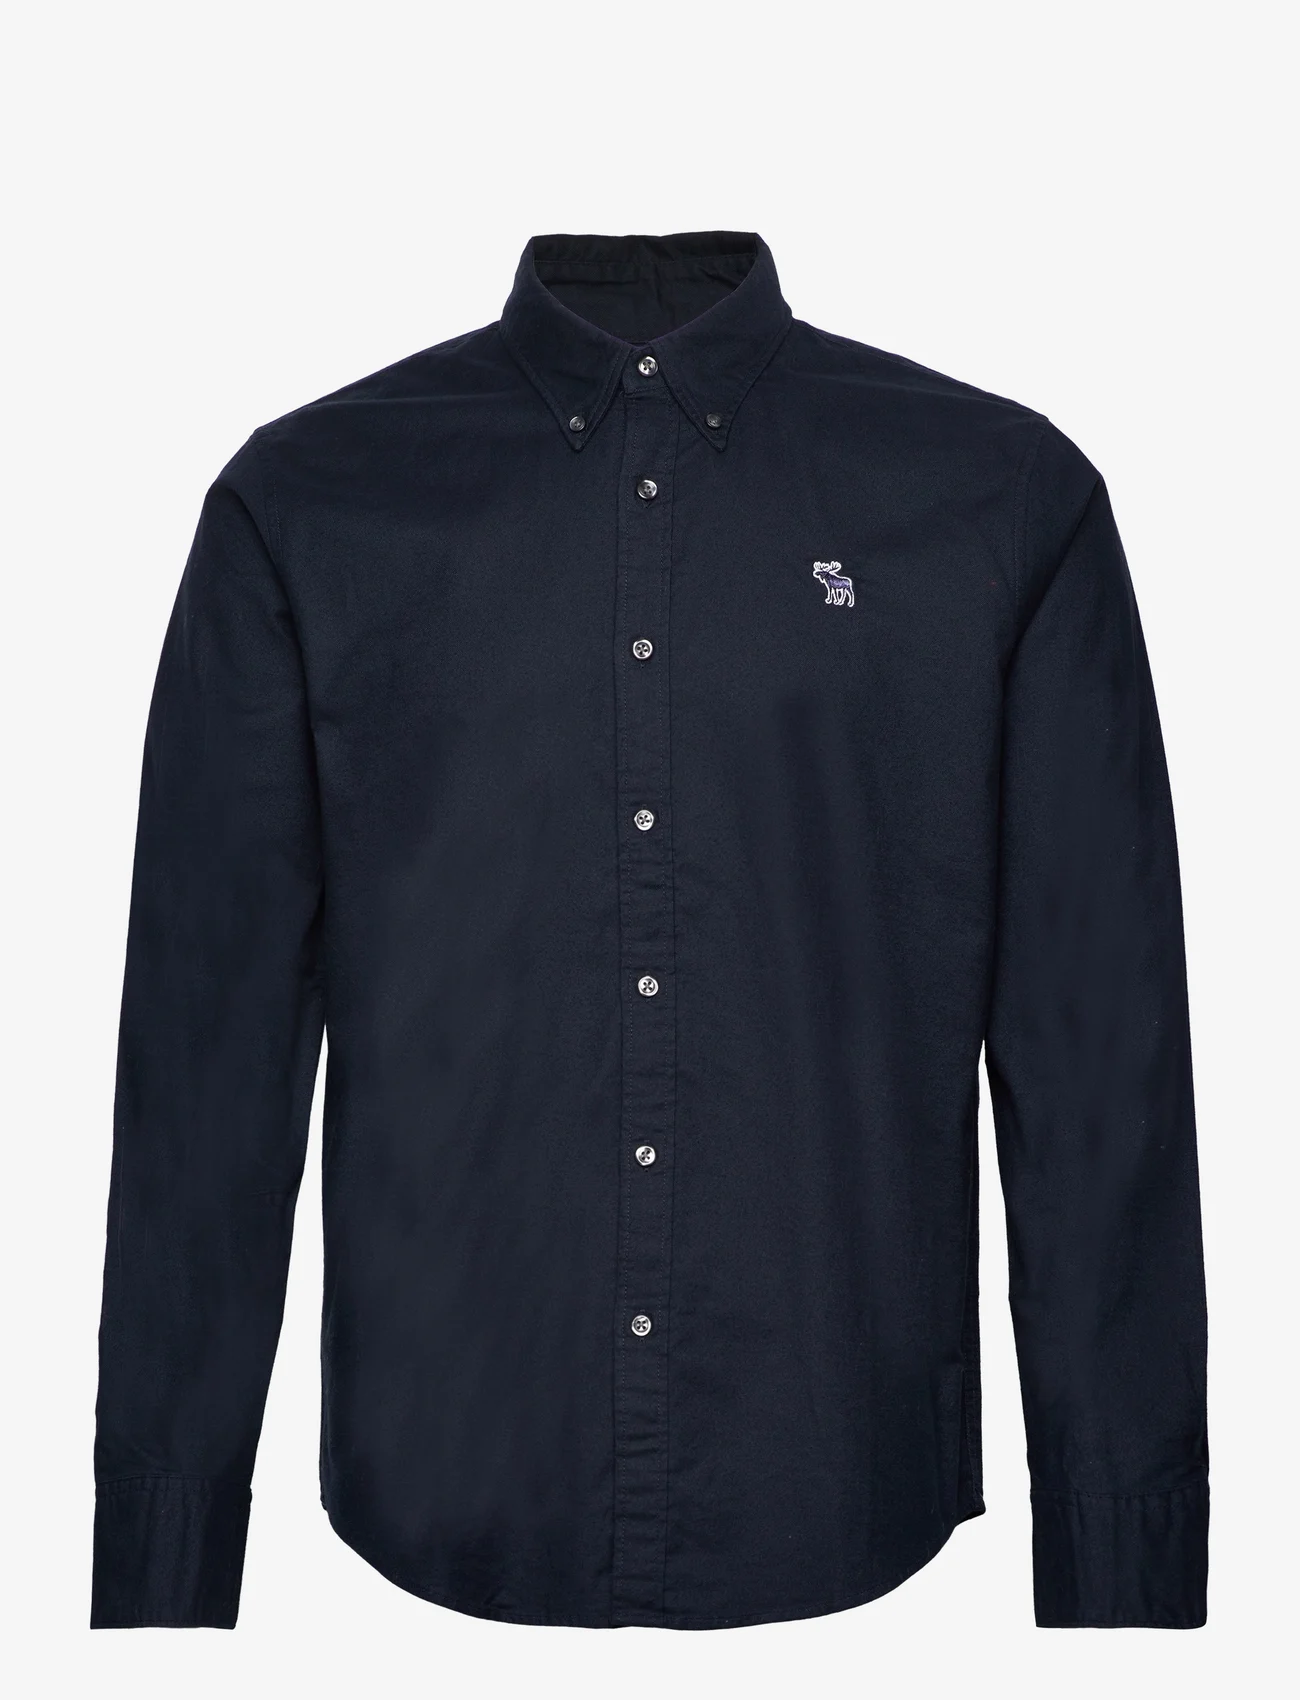 Abercrombie & Fitch - ANF MENS WOVENS - oxford-kauluspaidat - navy solid - 0